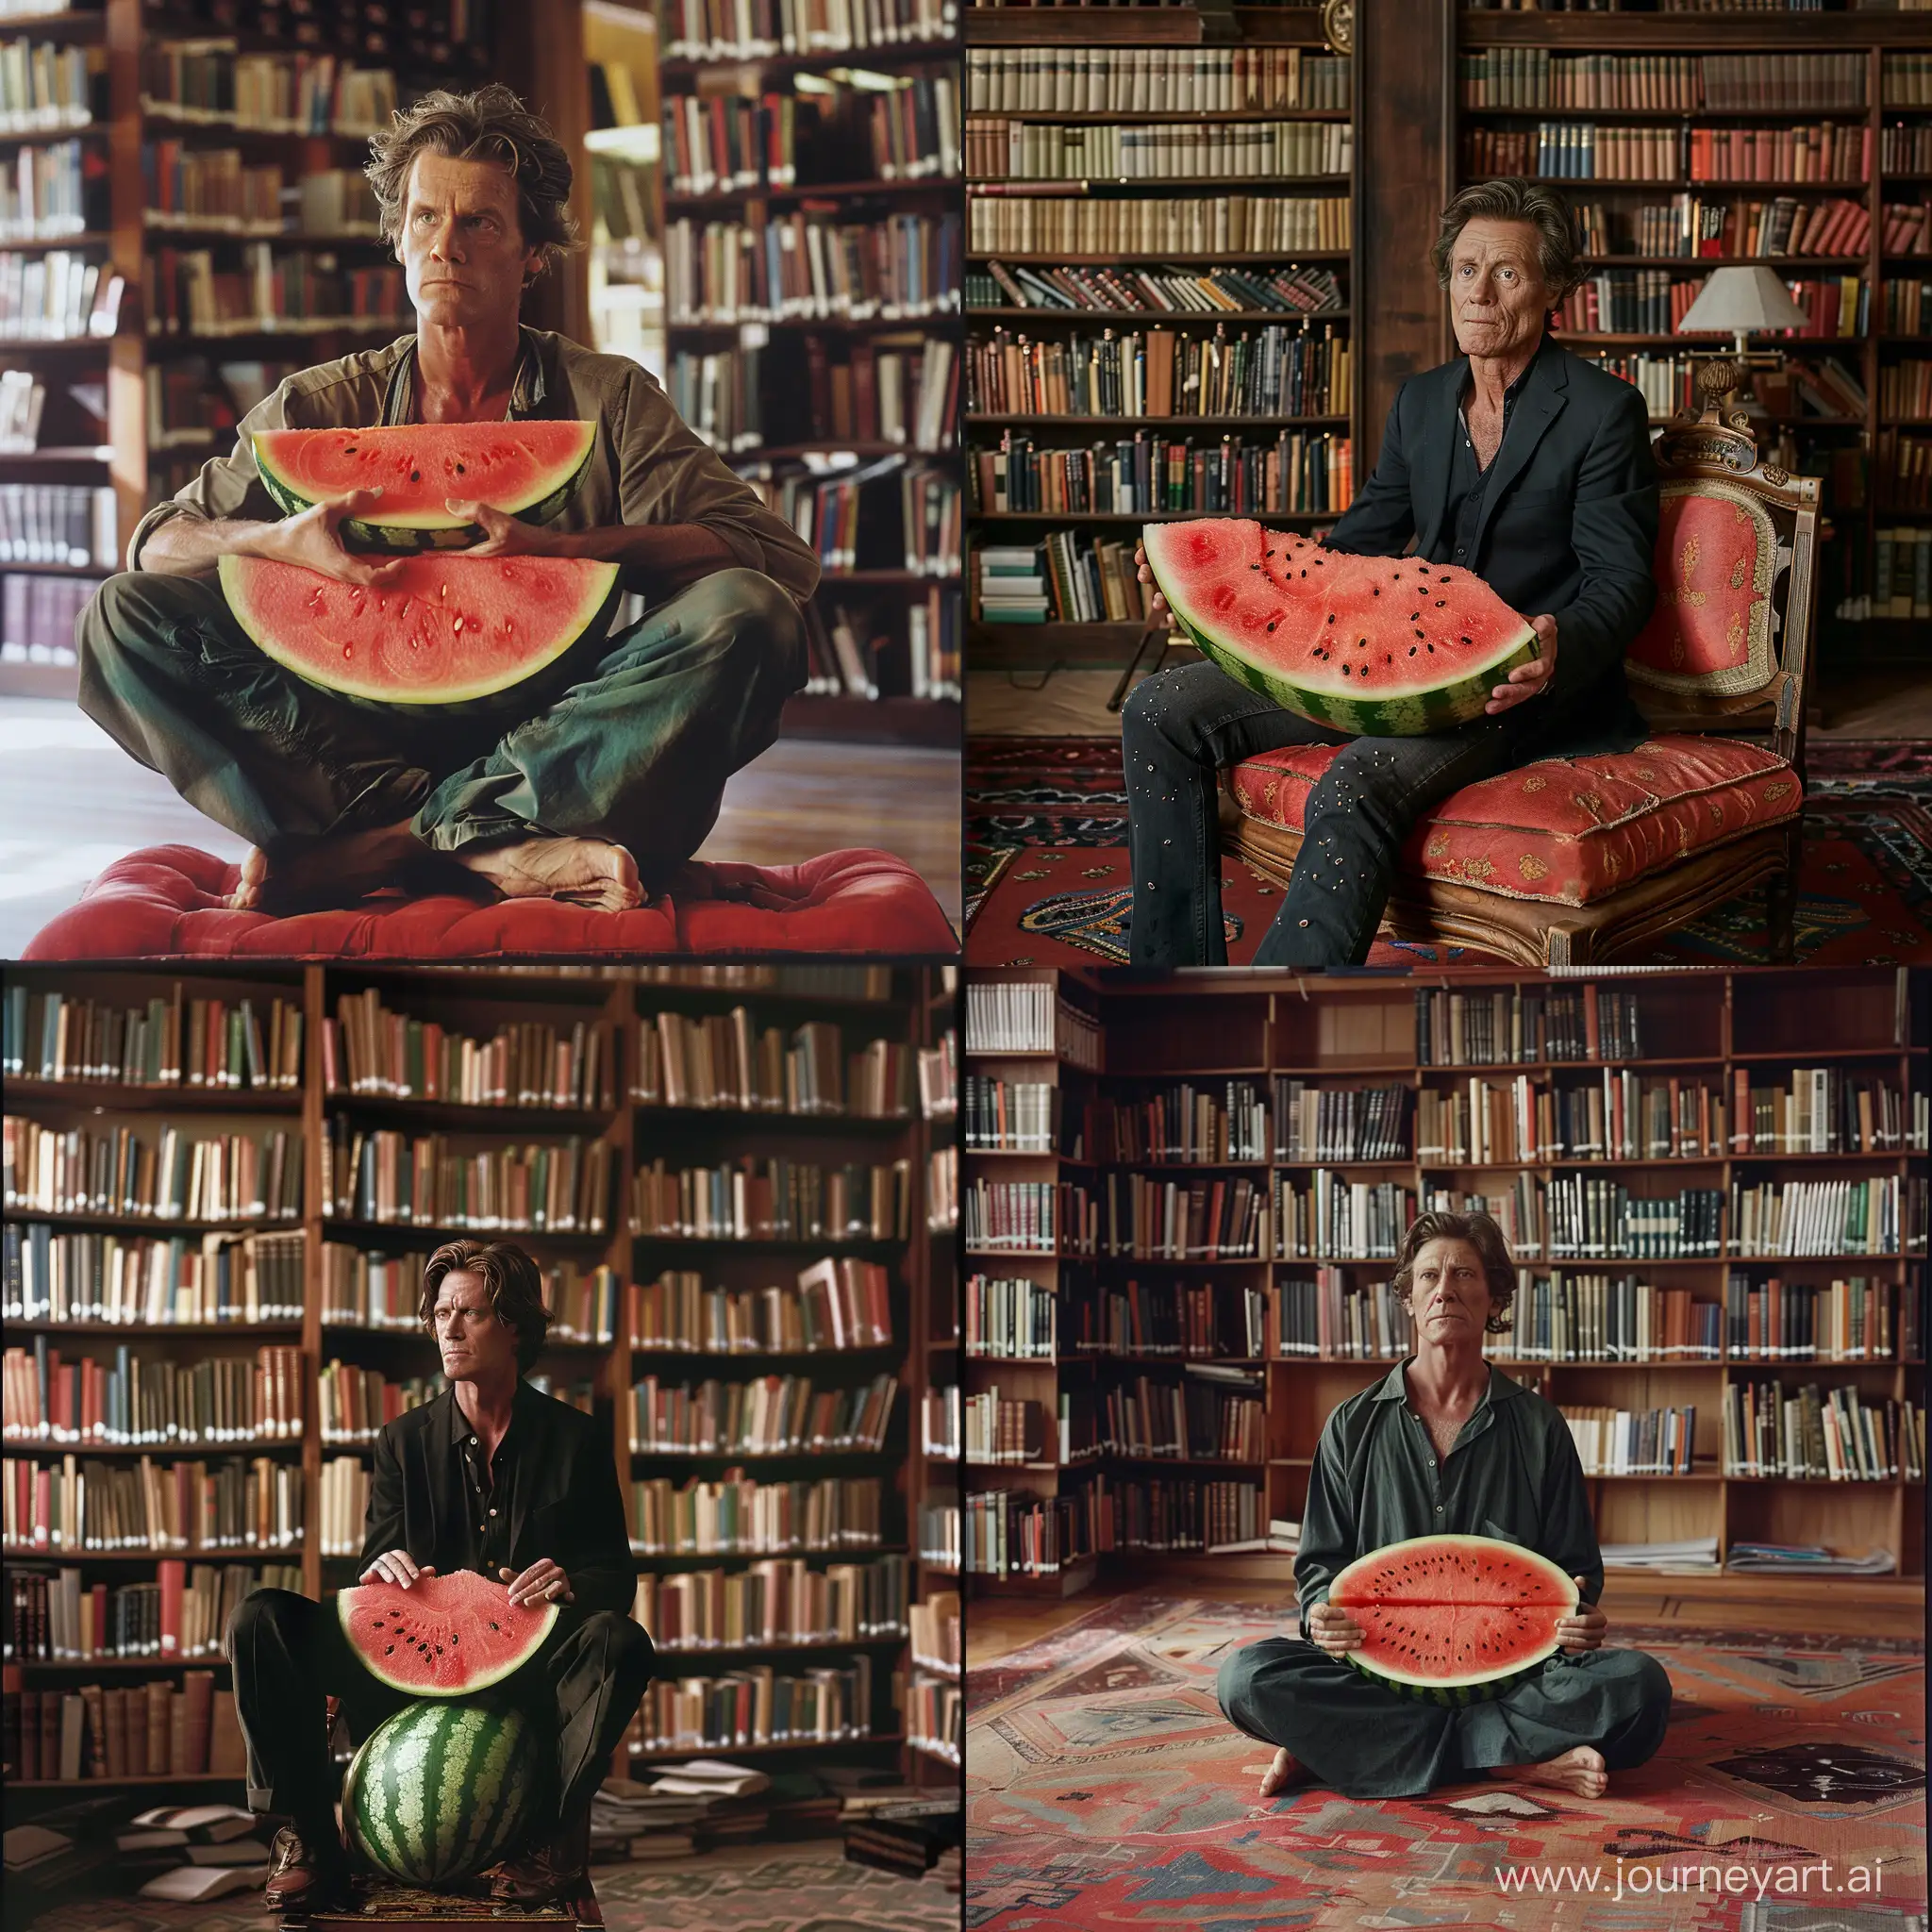 Willem-Dafoe-Relaxing-on-a-Giant-Watermelon-in-the-Library